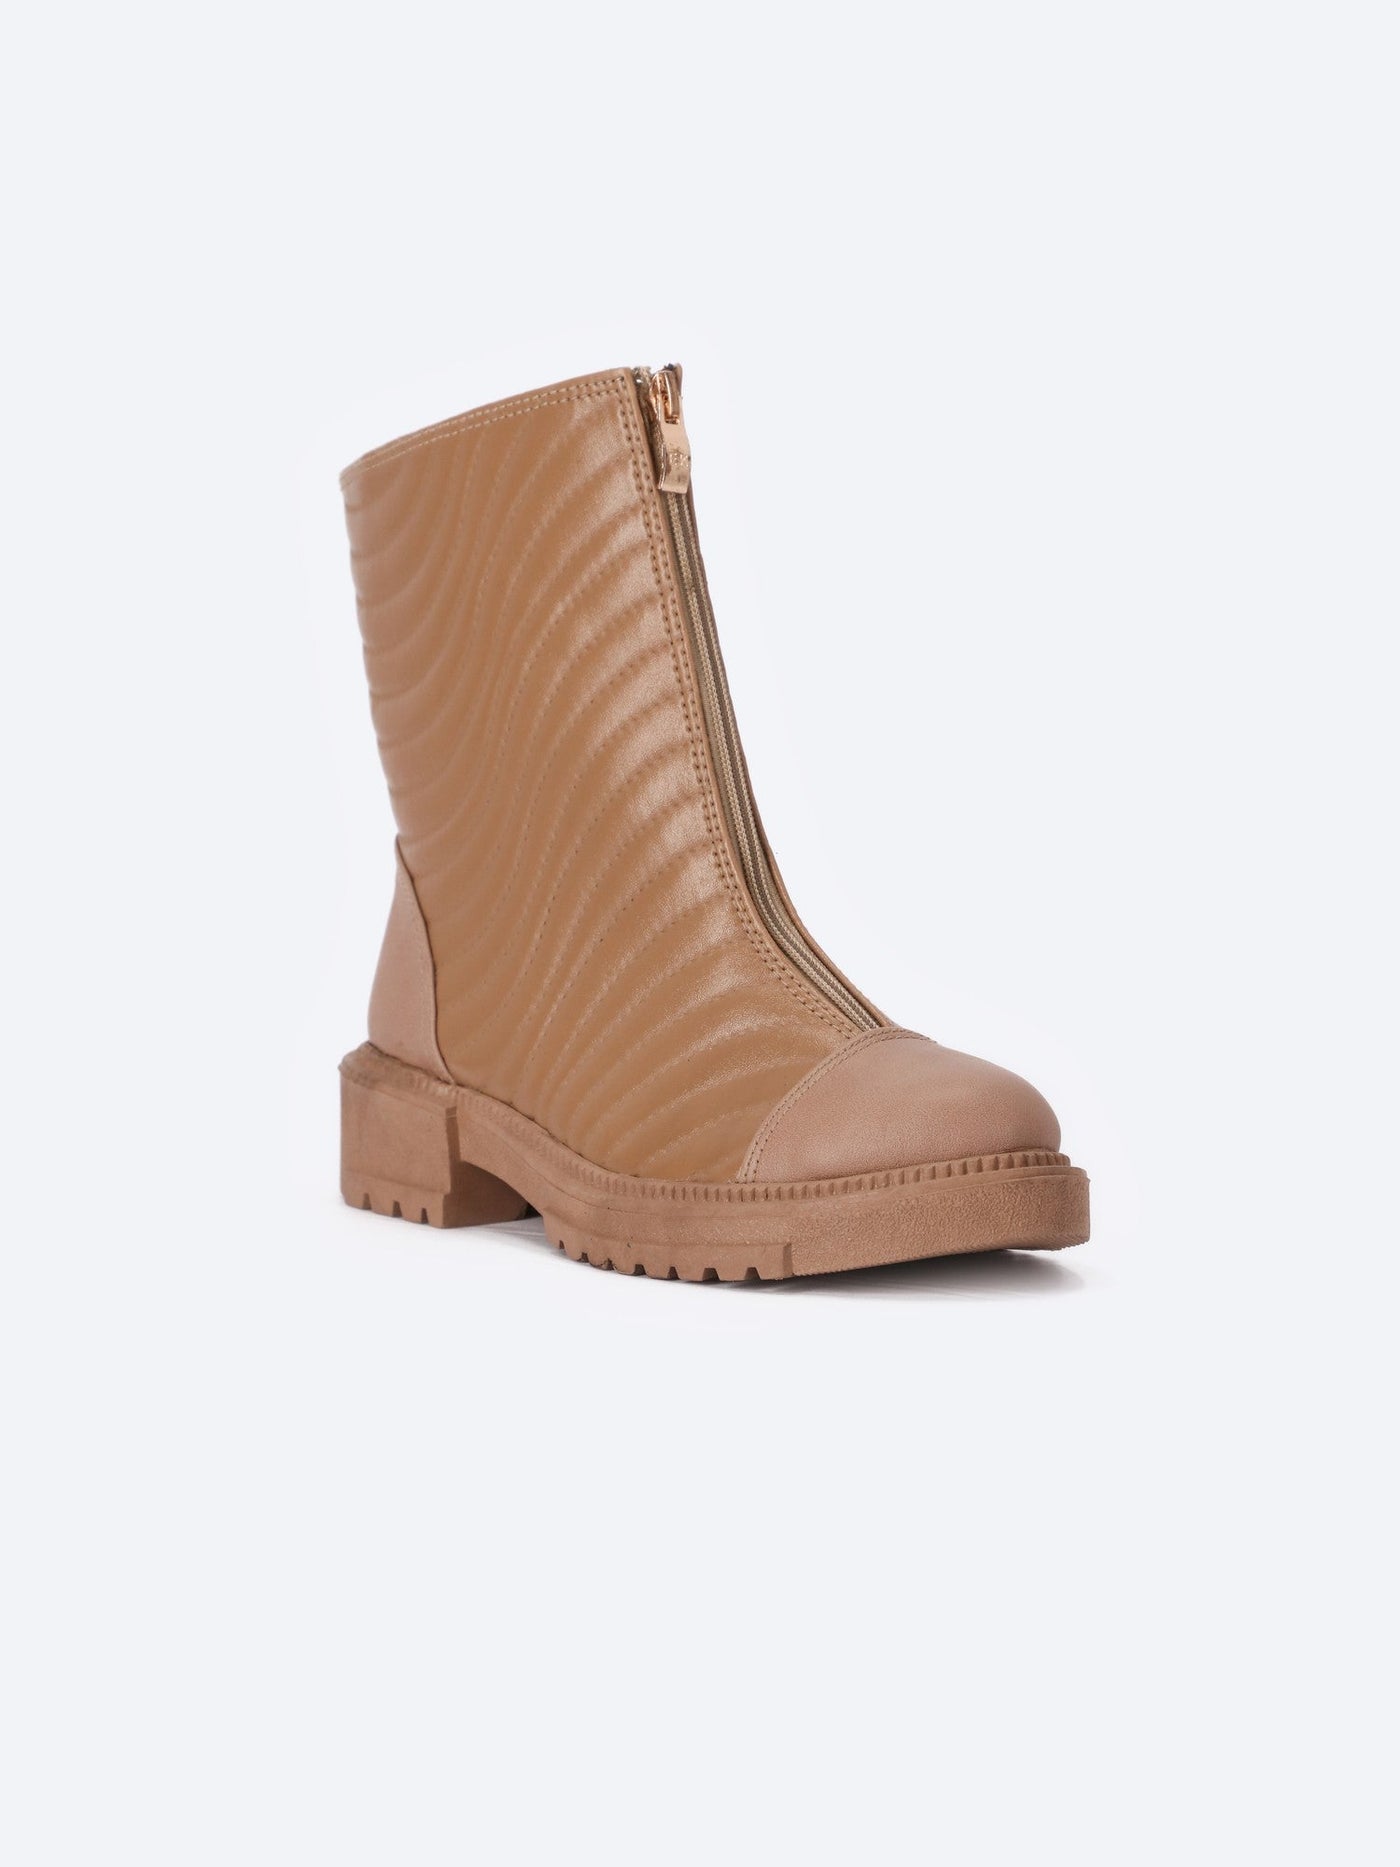 Ankle Boots - Contrast Panel - Front Zipper